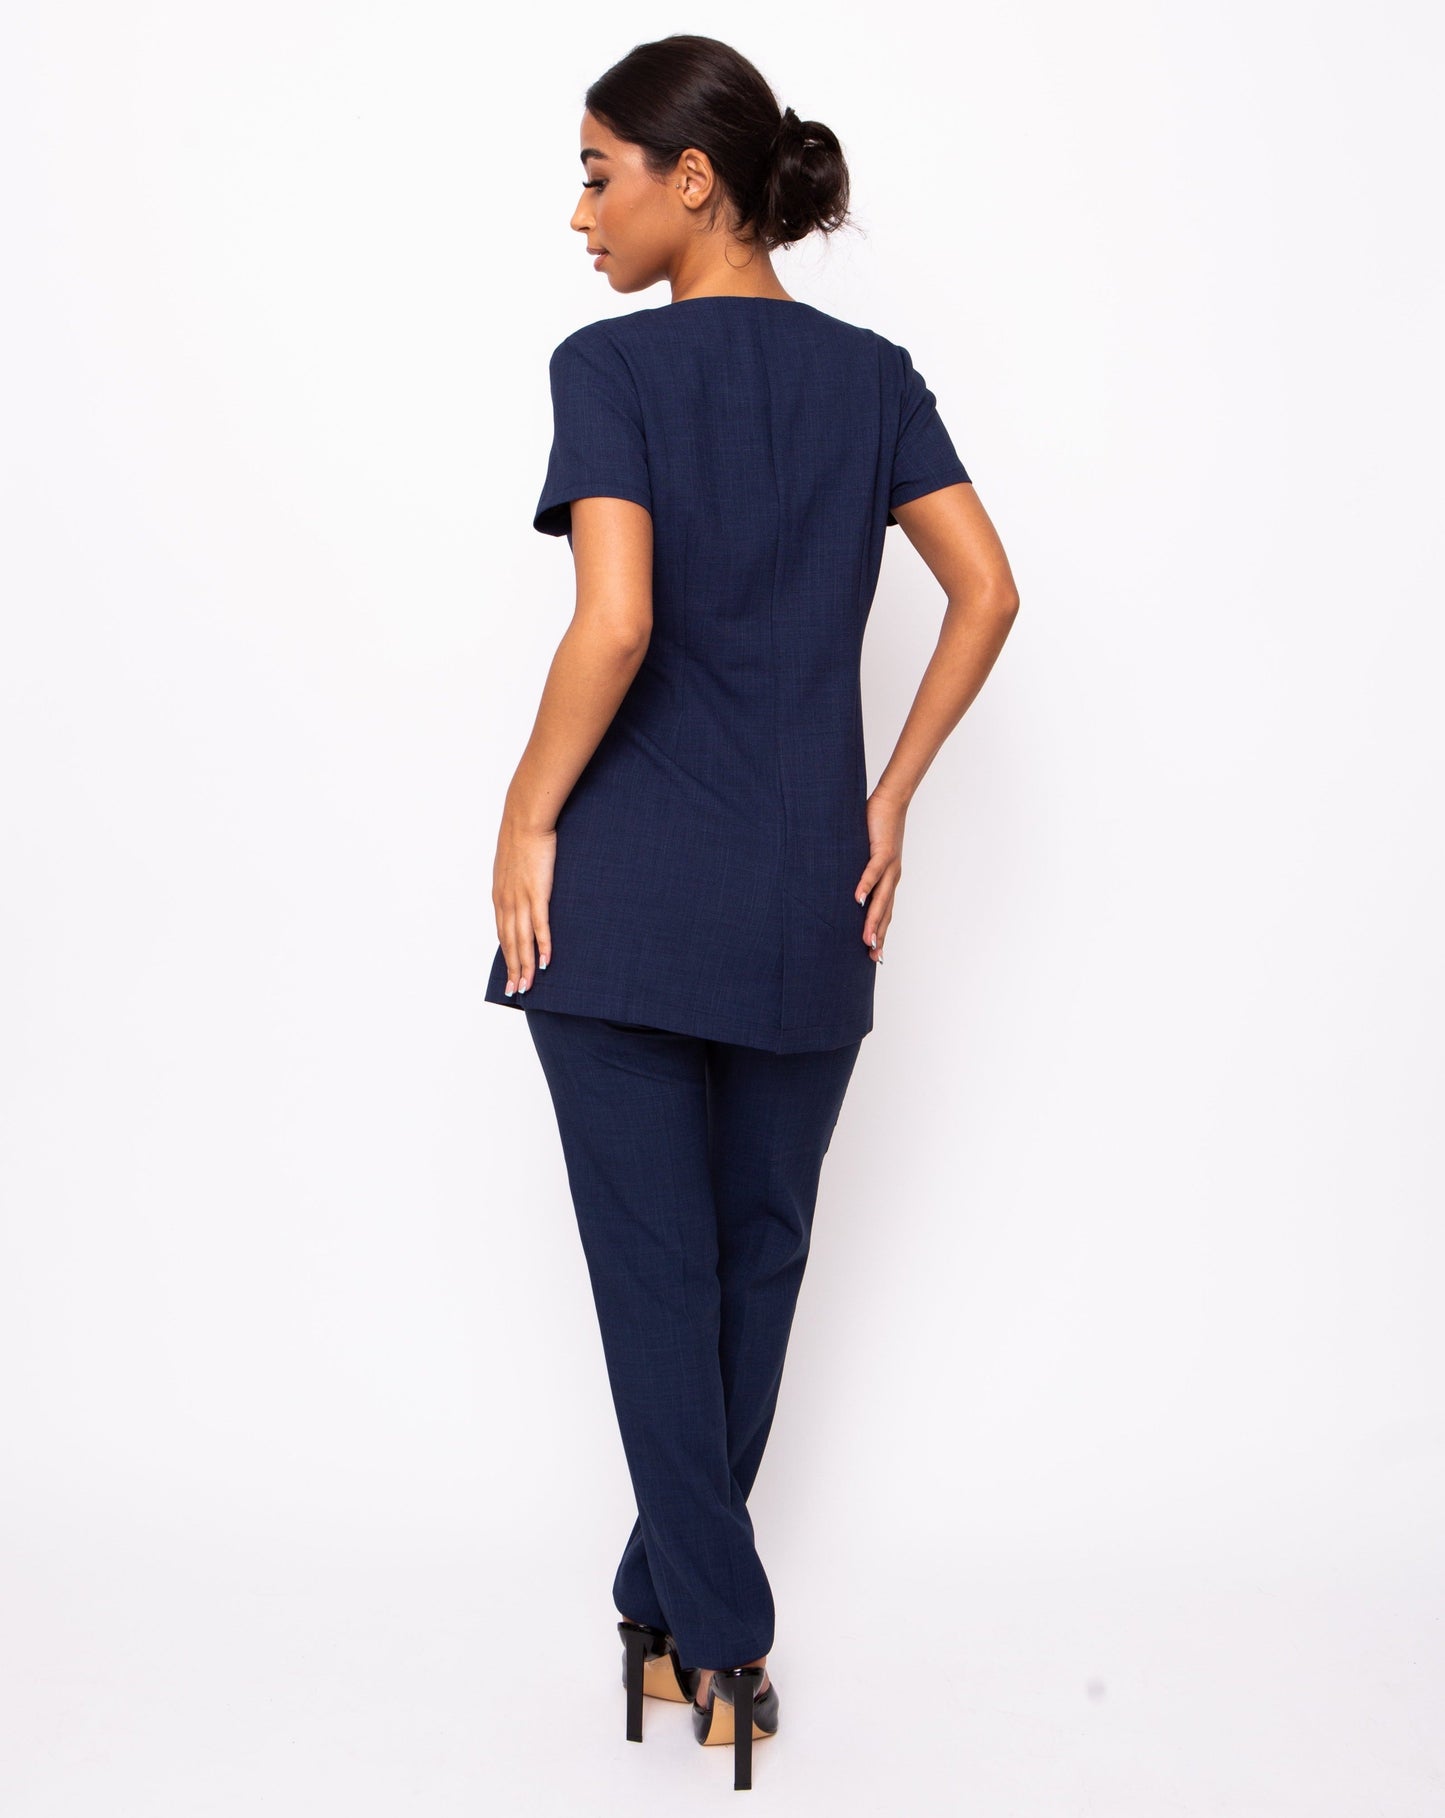 gold zip front navy blue tunic and trouser